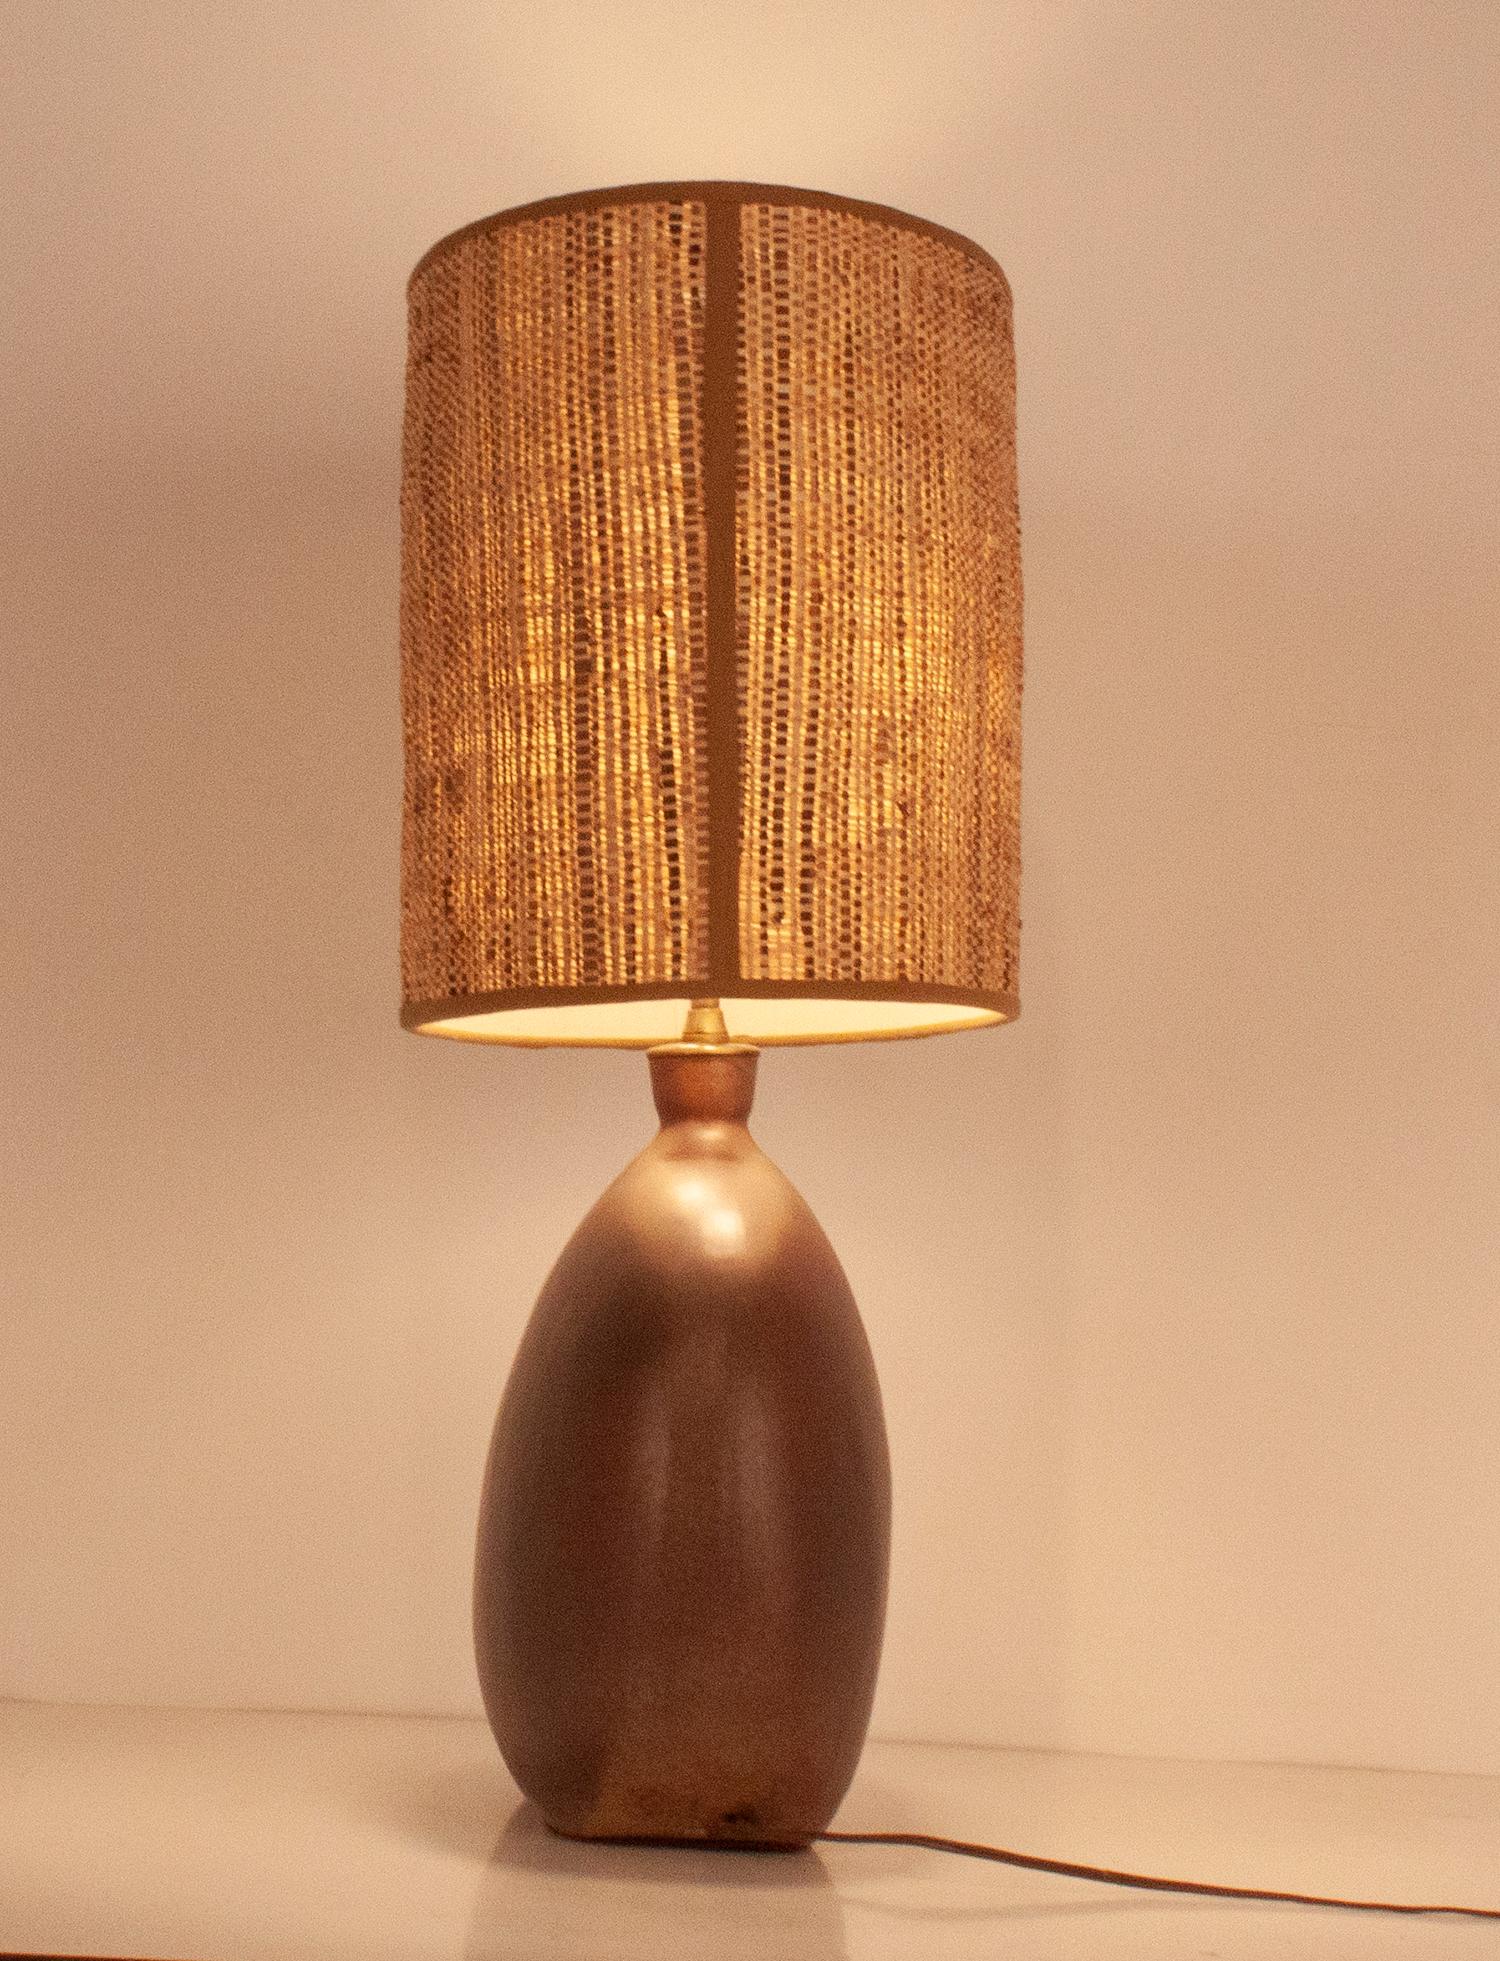 Large ceramic lamp made by Jordi Aiguadé. Around 1970.
In brown color and with a very organic shape. The size is spectacular.
It is in great condition.
Lampshade, the structure is the original and the textile has been changed, which is a